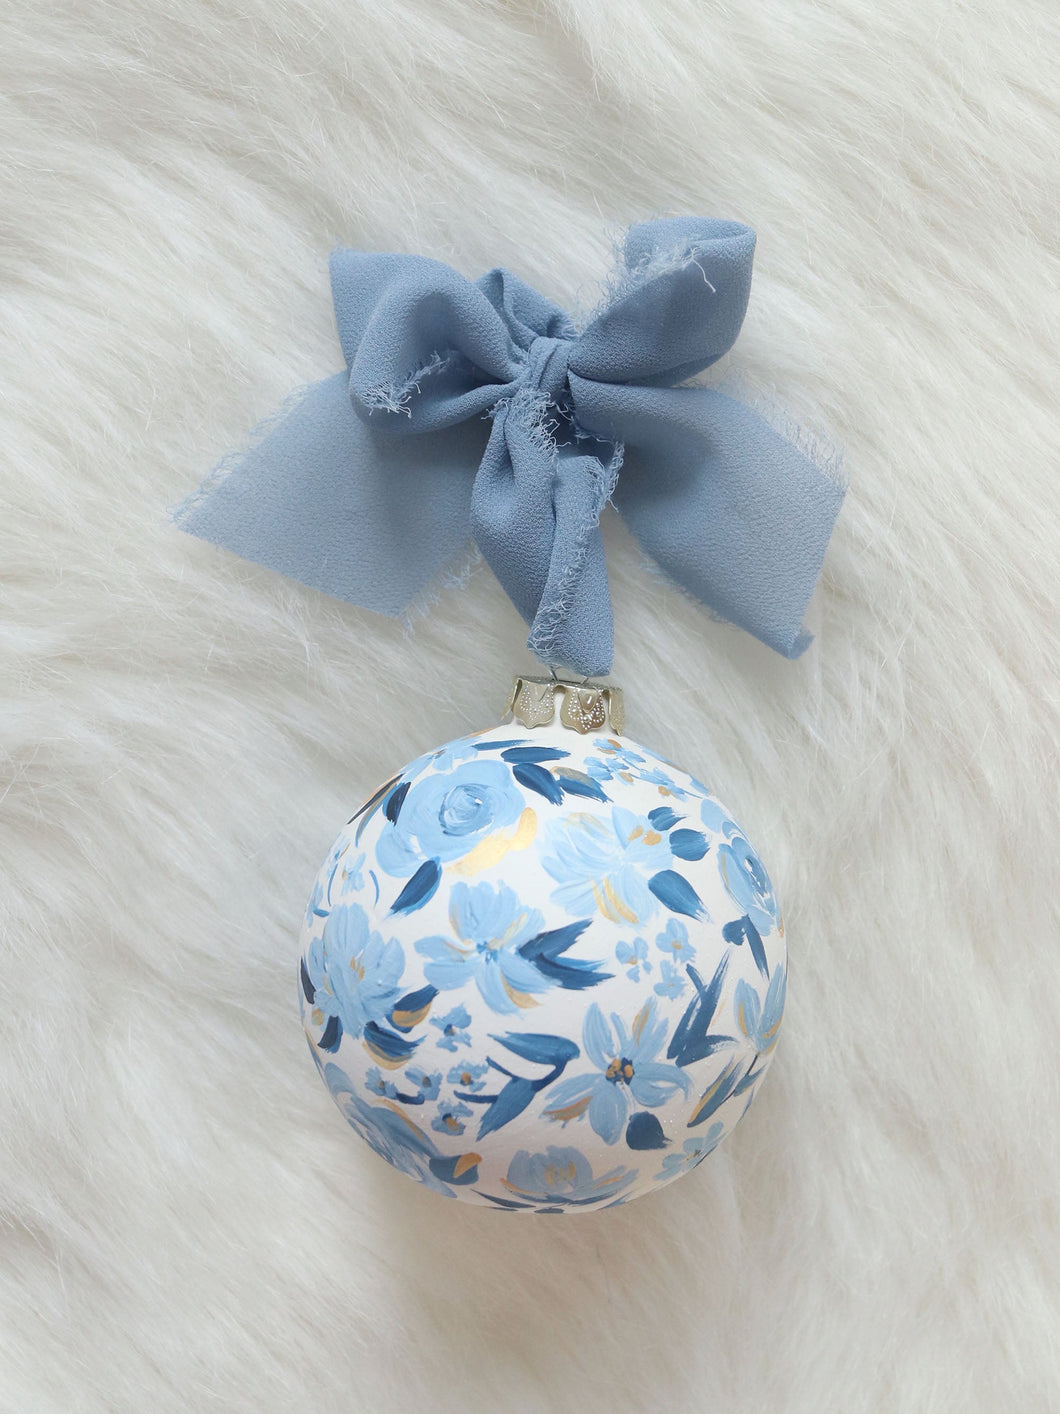 Blue floral hand-painted ornament